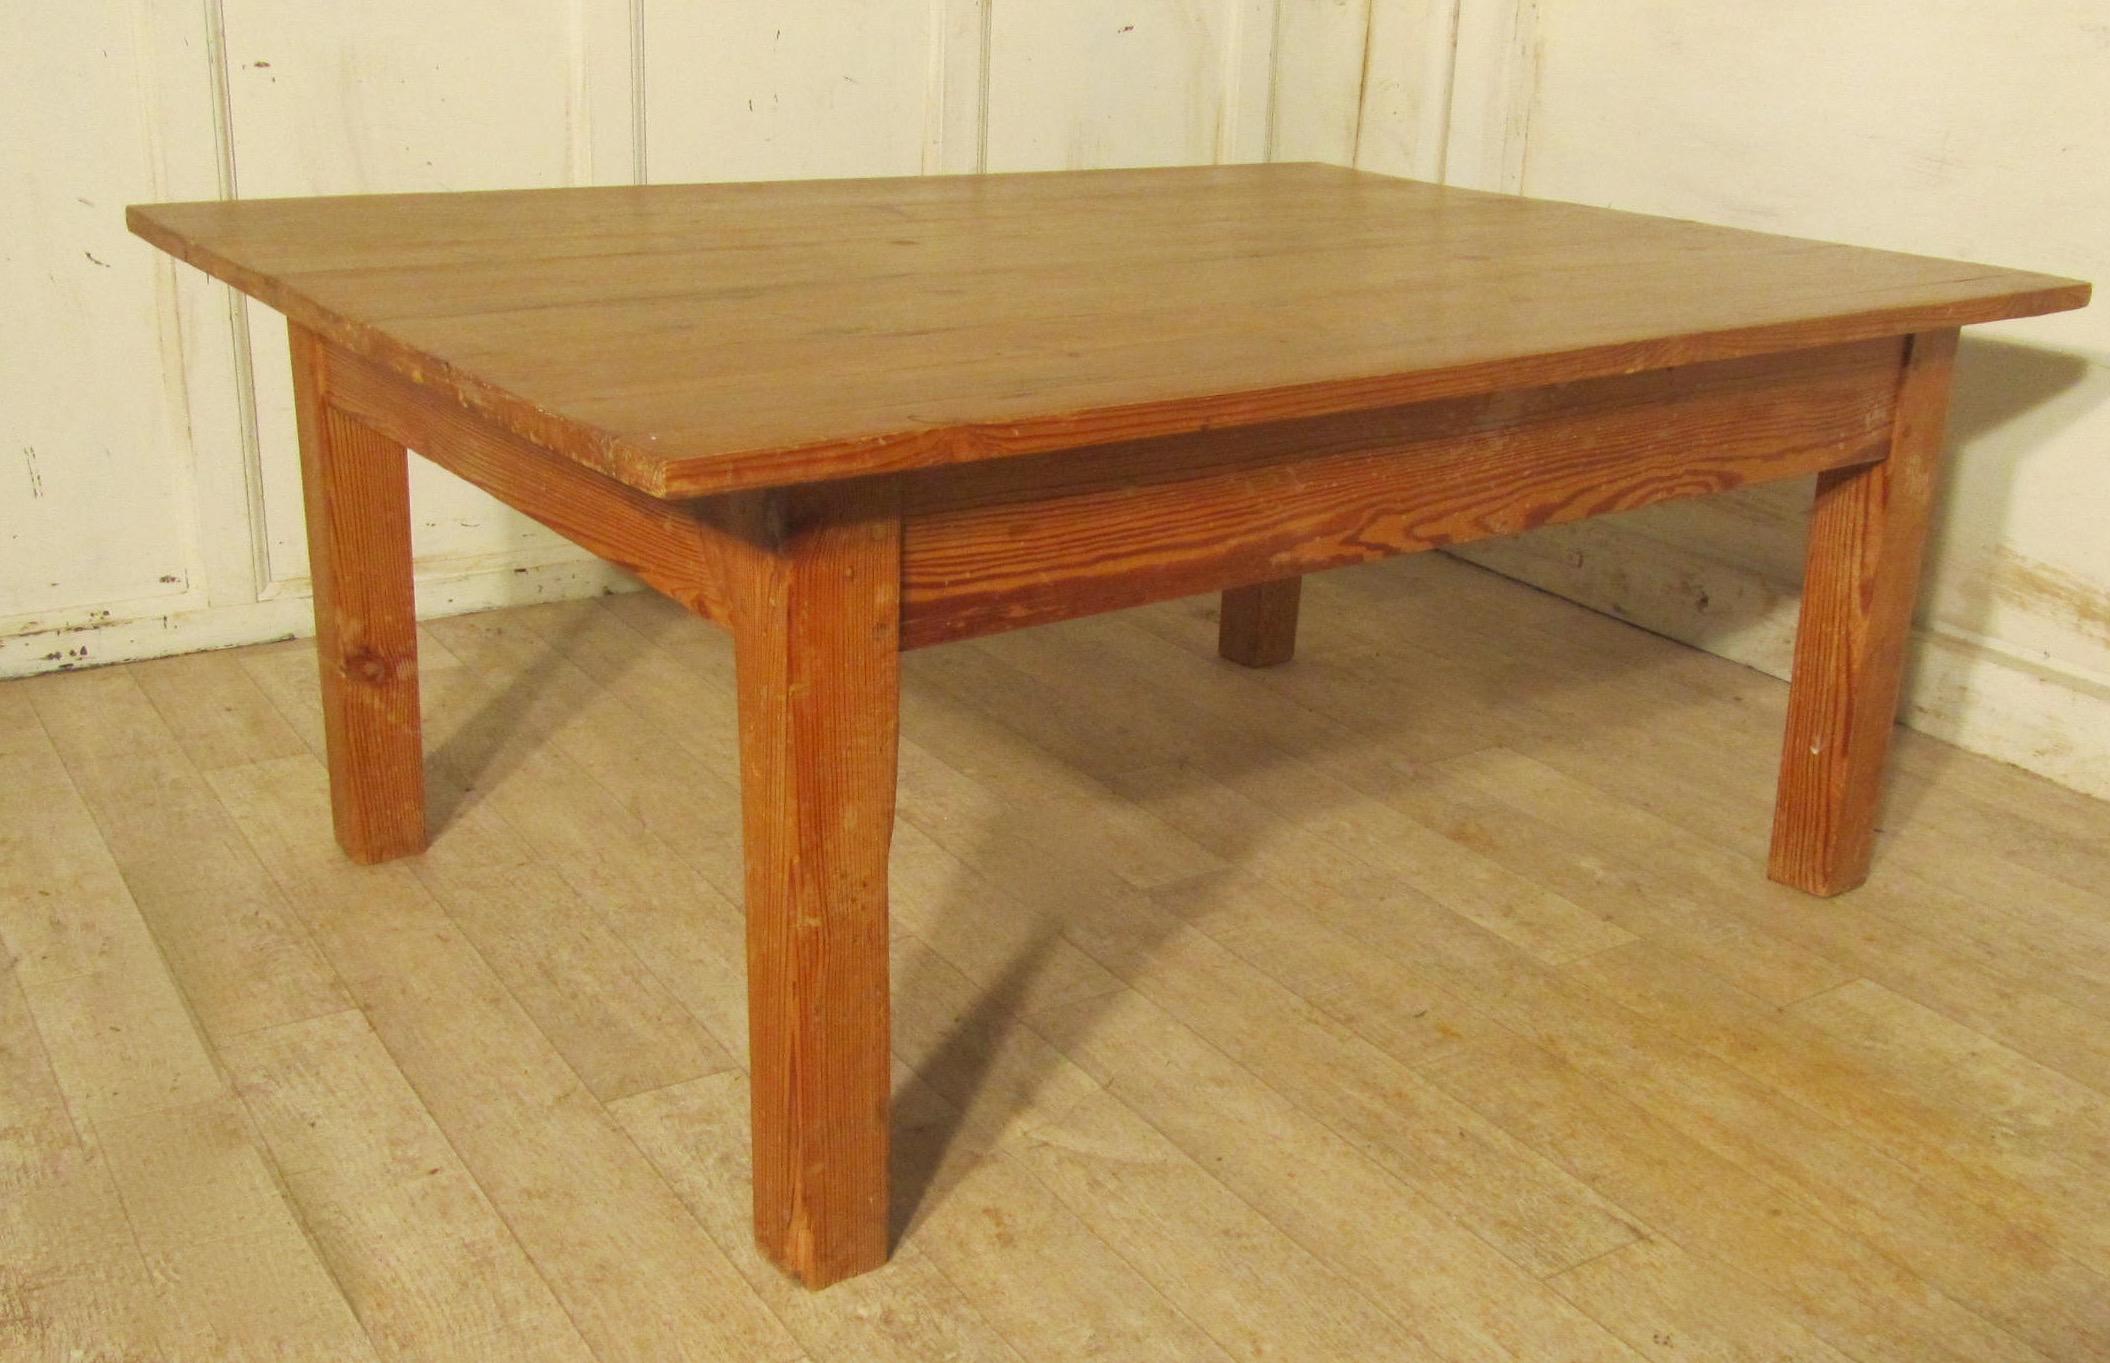 Farmhouse Style Chunky Pine Coffee Table

This is a traditional Kitchen table, the square legs have been lowered to make it into a Coffee Table
The table has a Pine Plank top, it is very sound and sturdy.

As to condition, this table is very sturdy,